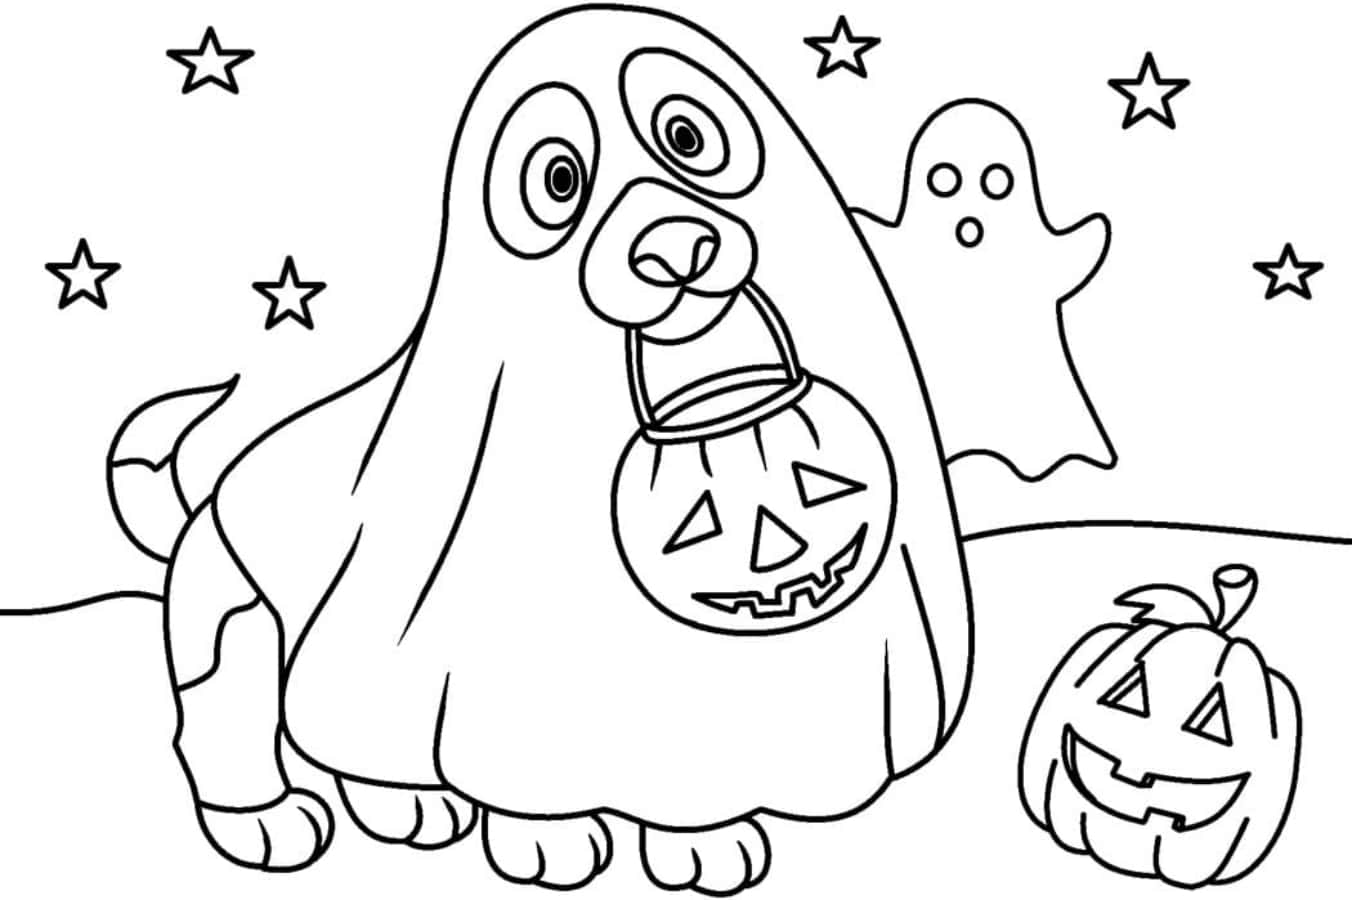 Download Halloween Dog Coloring Page Picture | Wallpapers.com